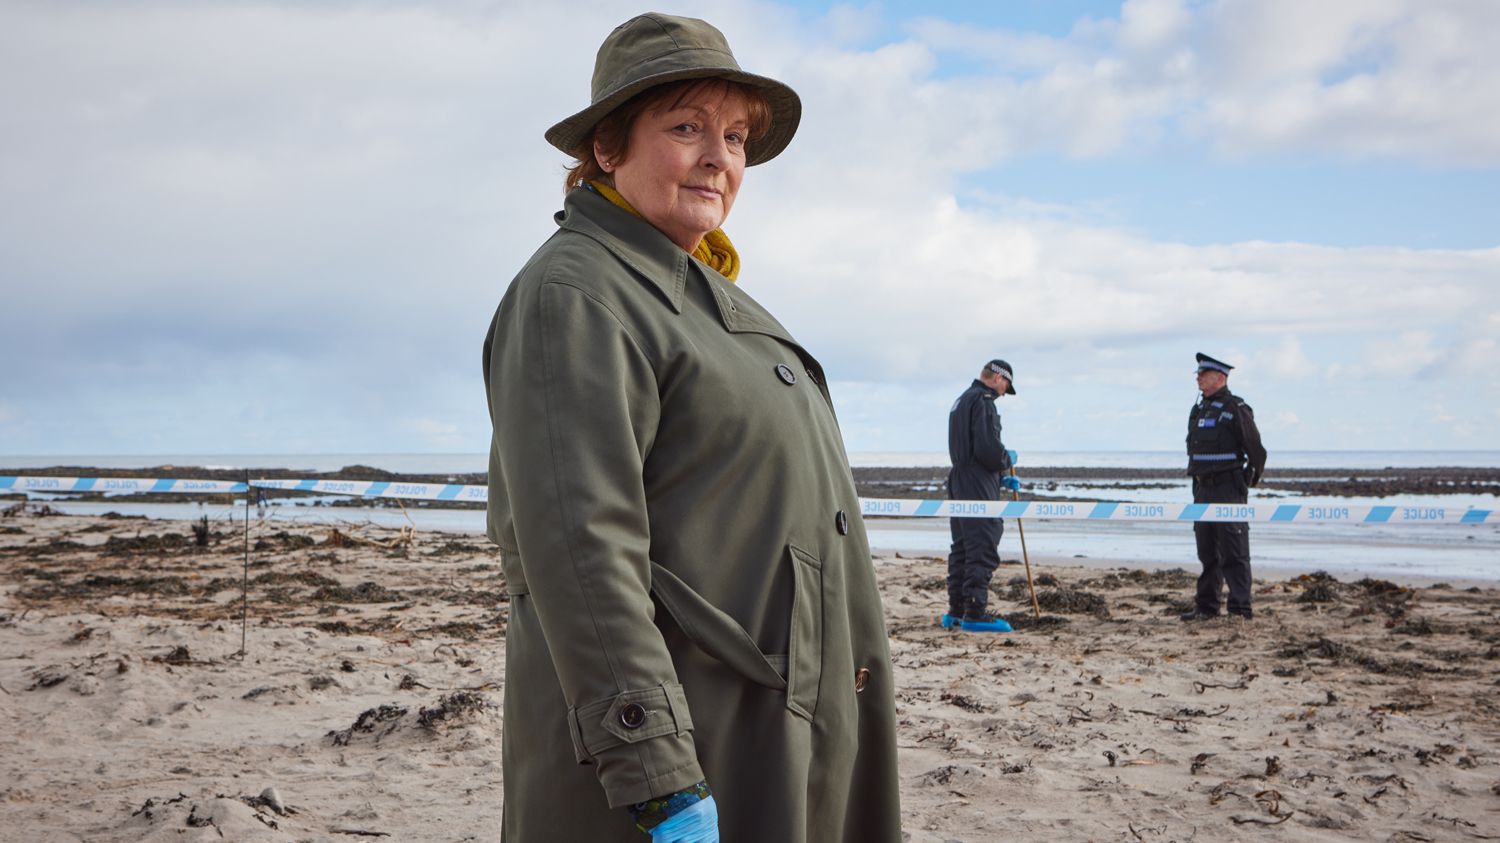 When is Vera back on TV?